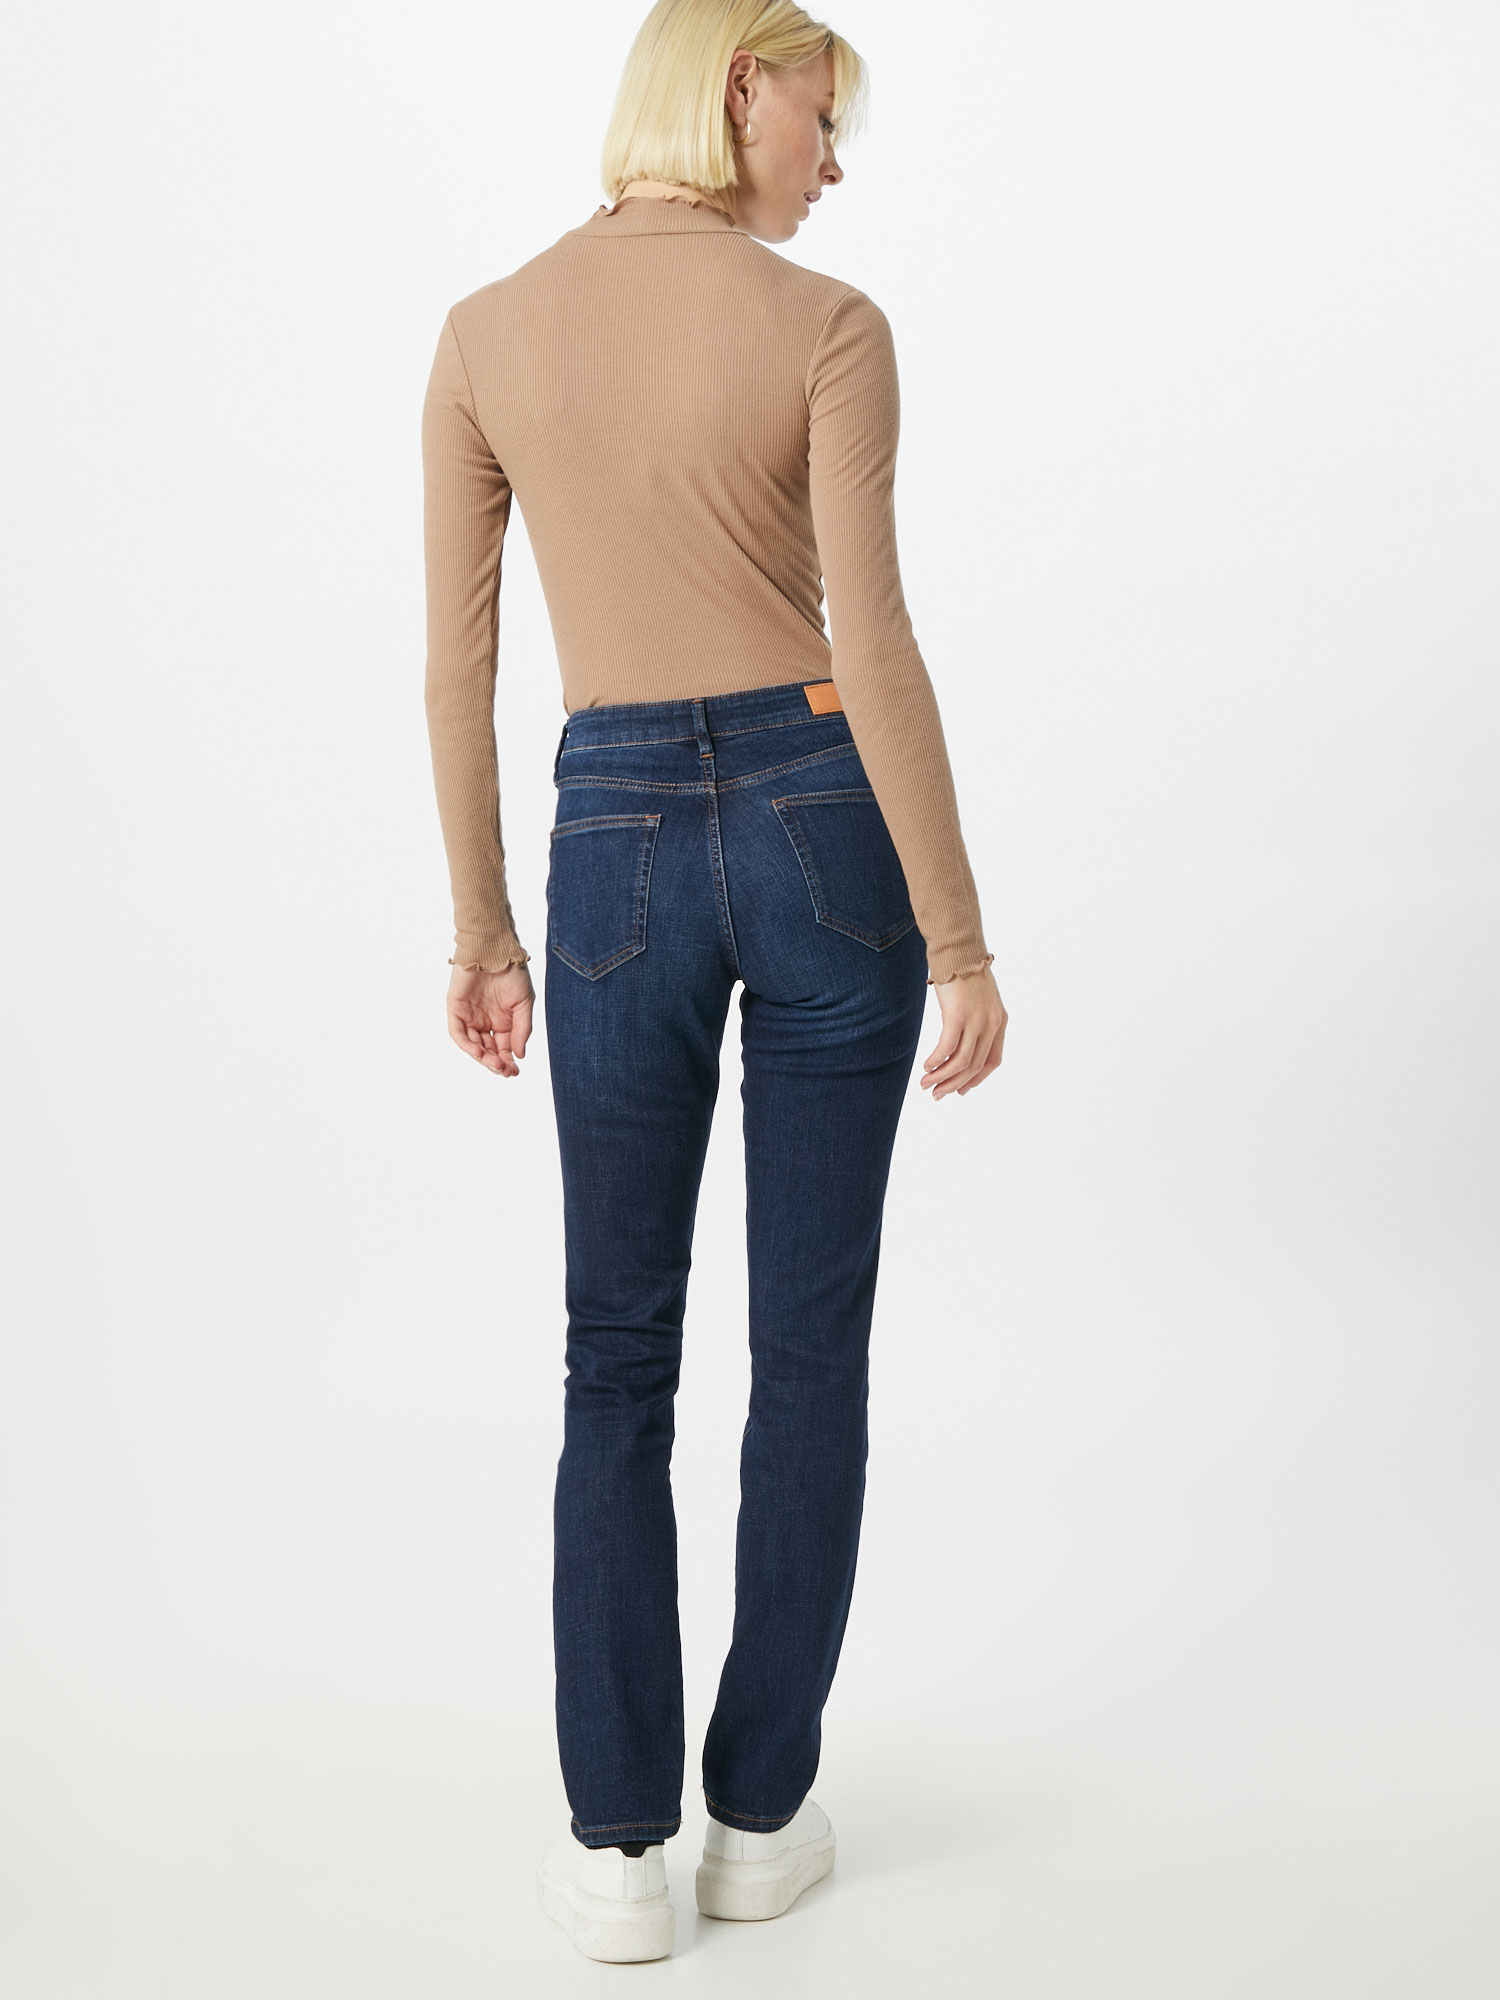 s.Oliver Jeans Betsy in Dunkelblau 